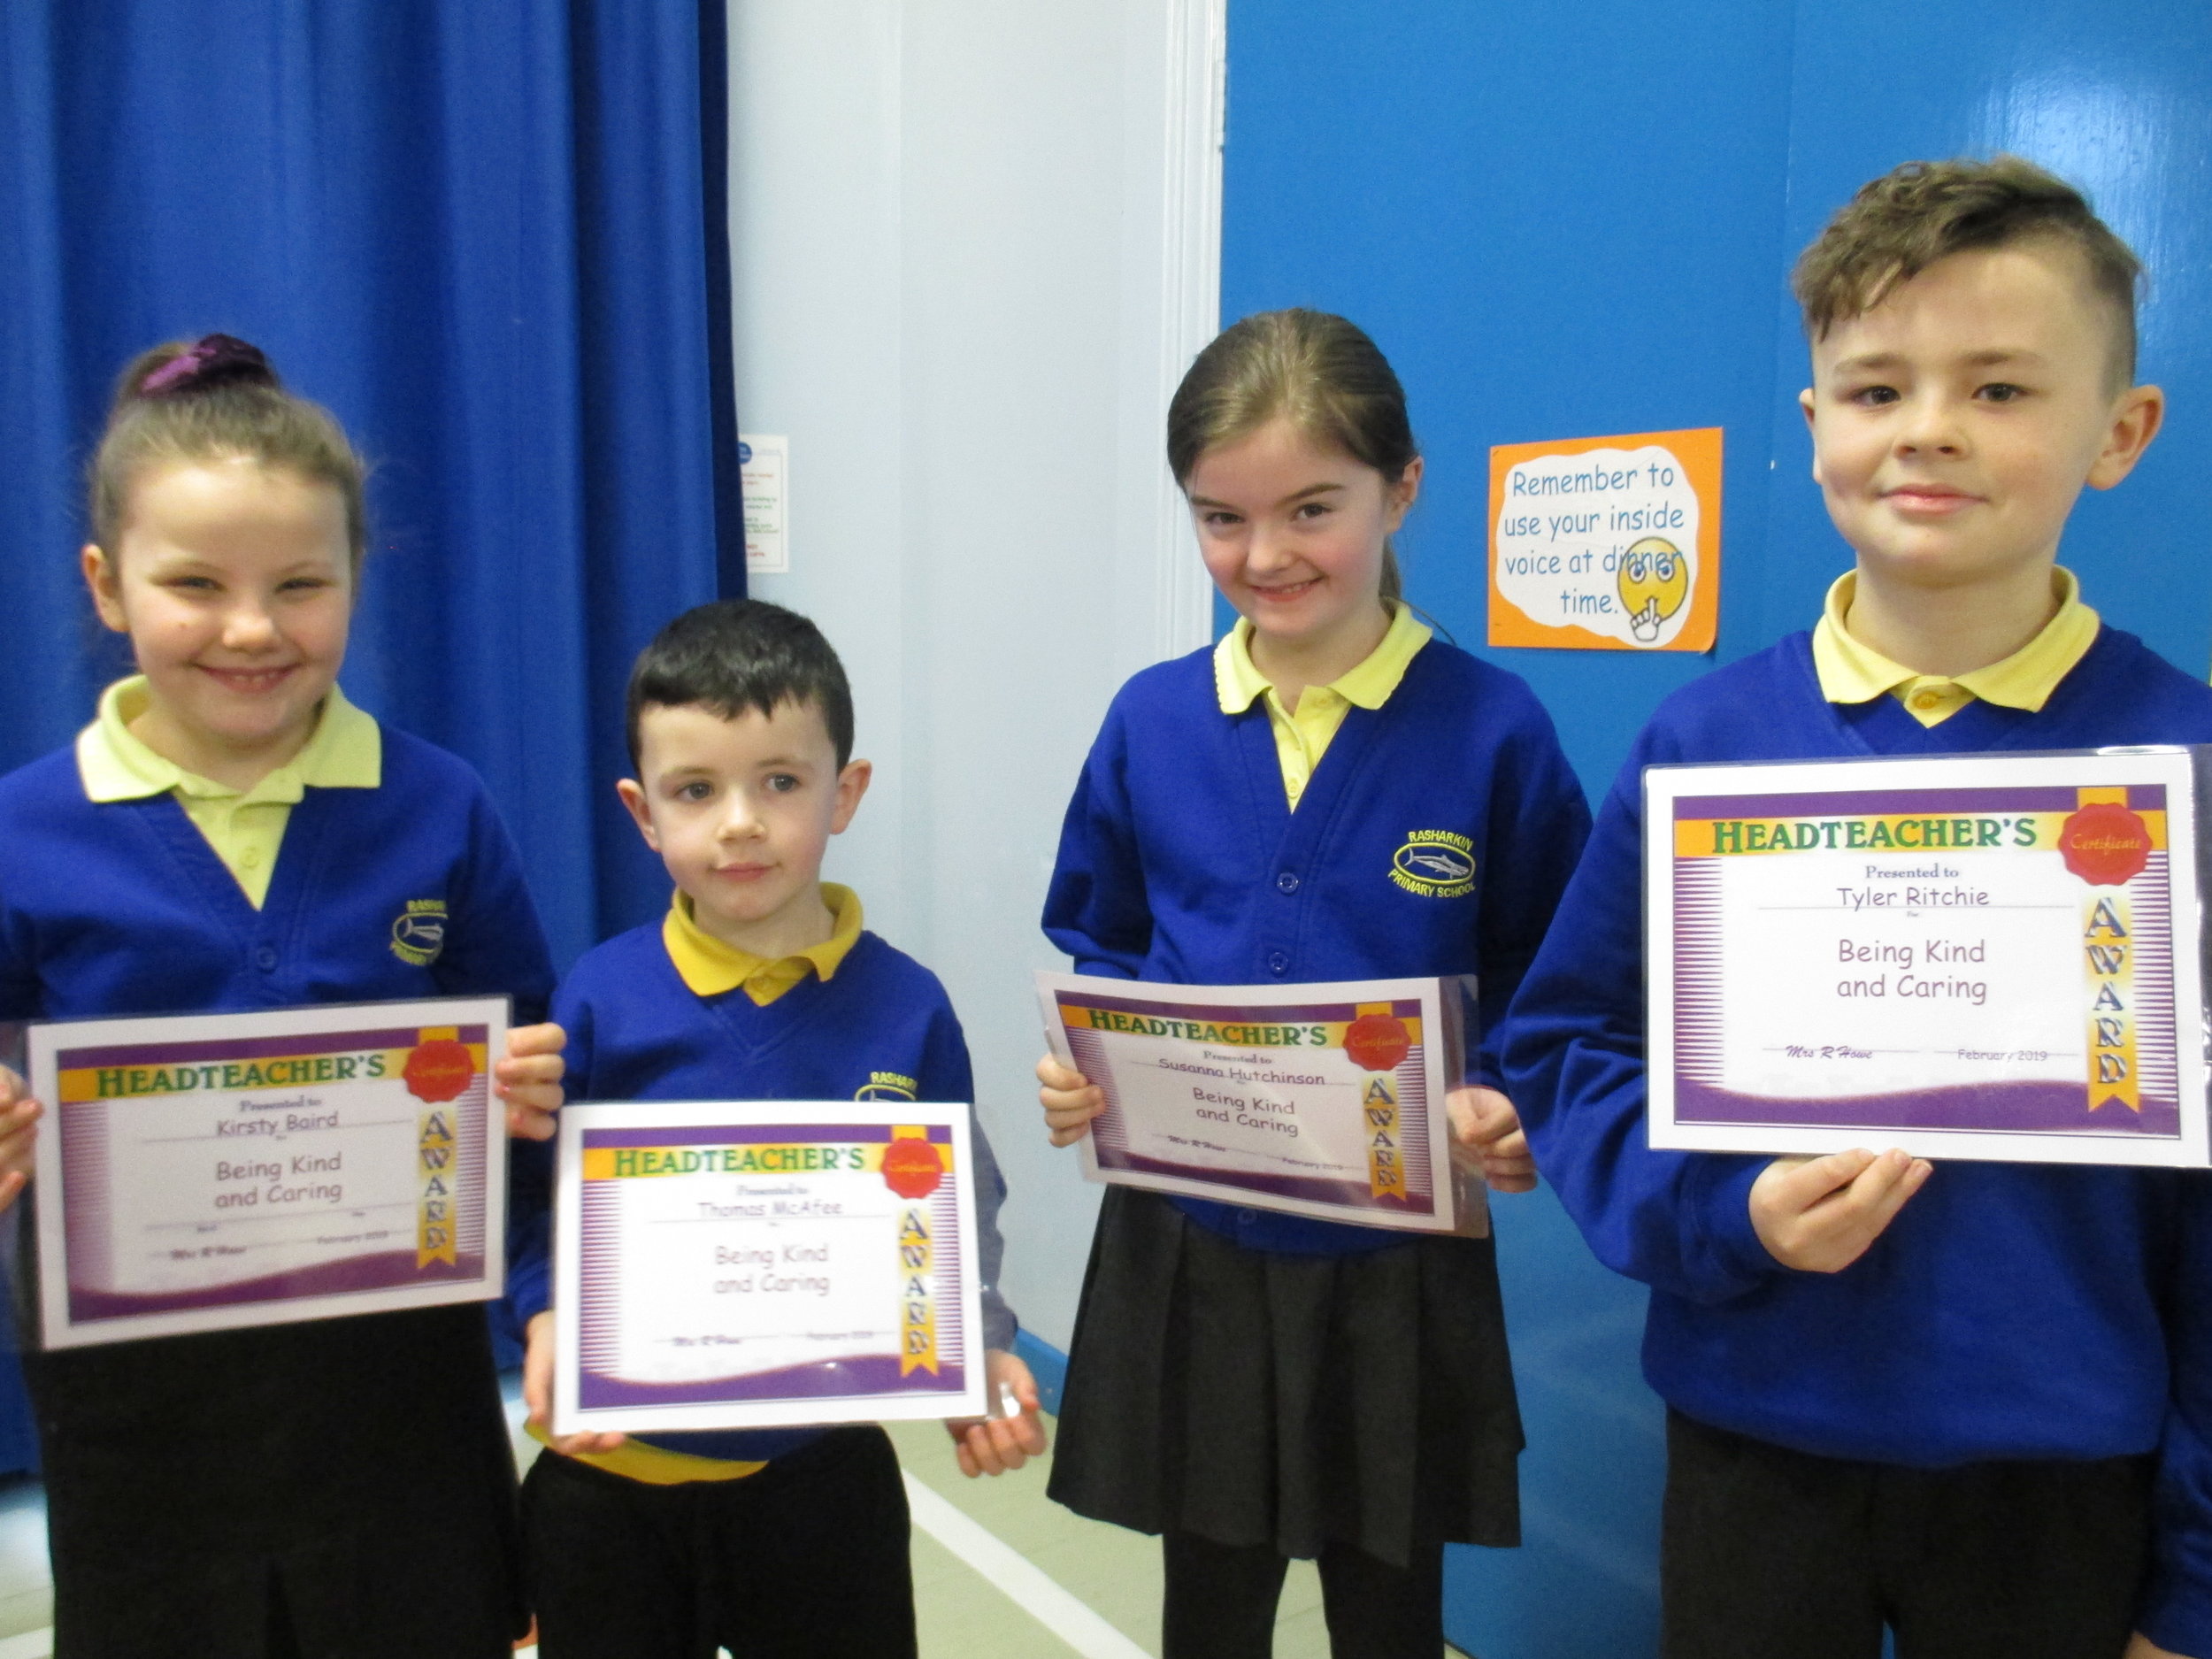 Kirsty, Thomas, Susanna and Tyler received the 'Being Kind and Caring Award' for January 2019